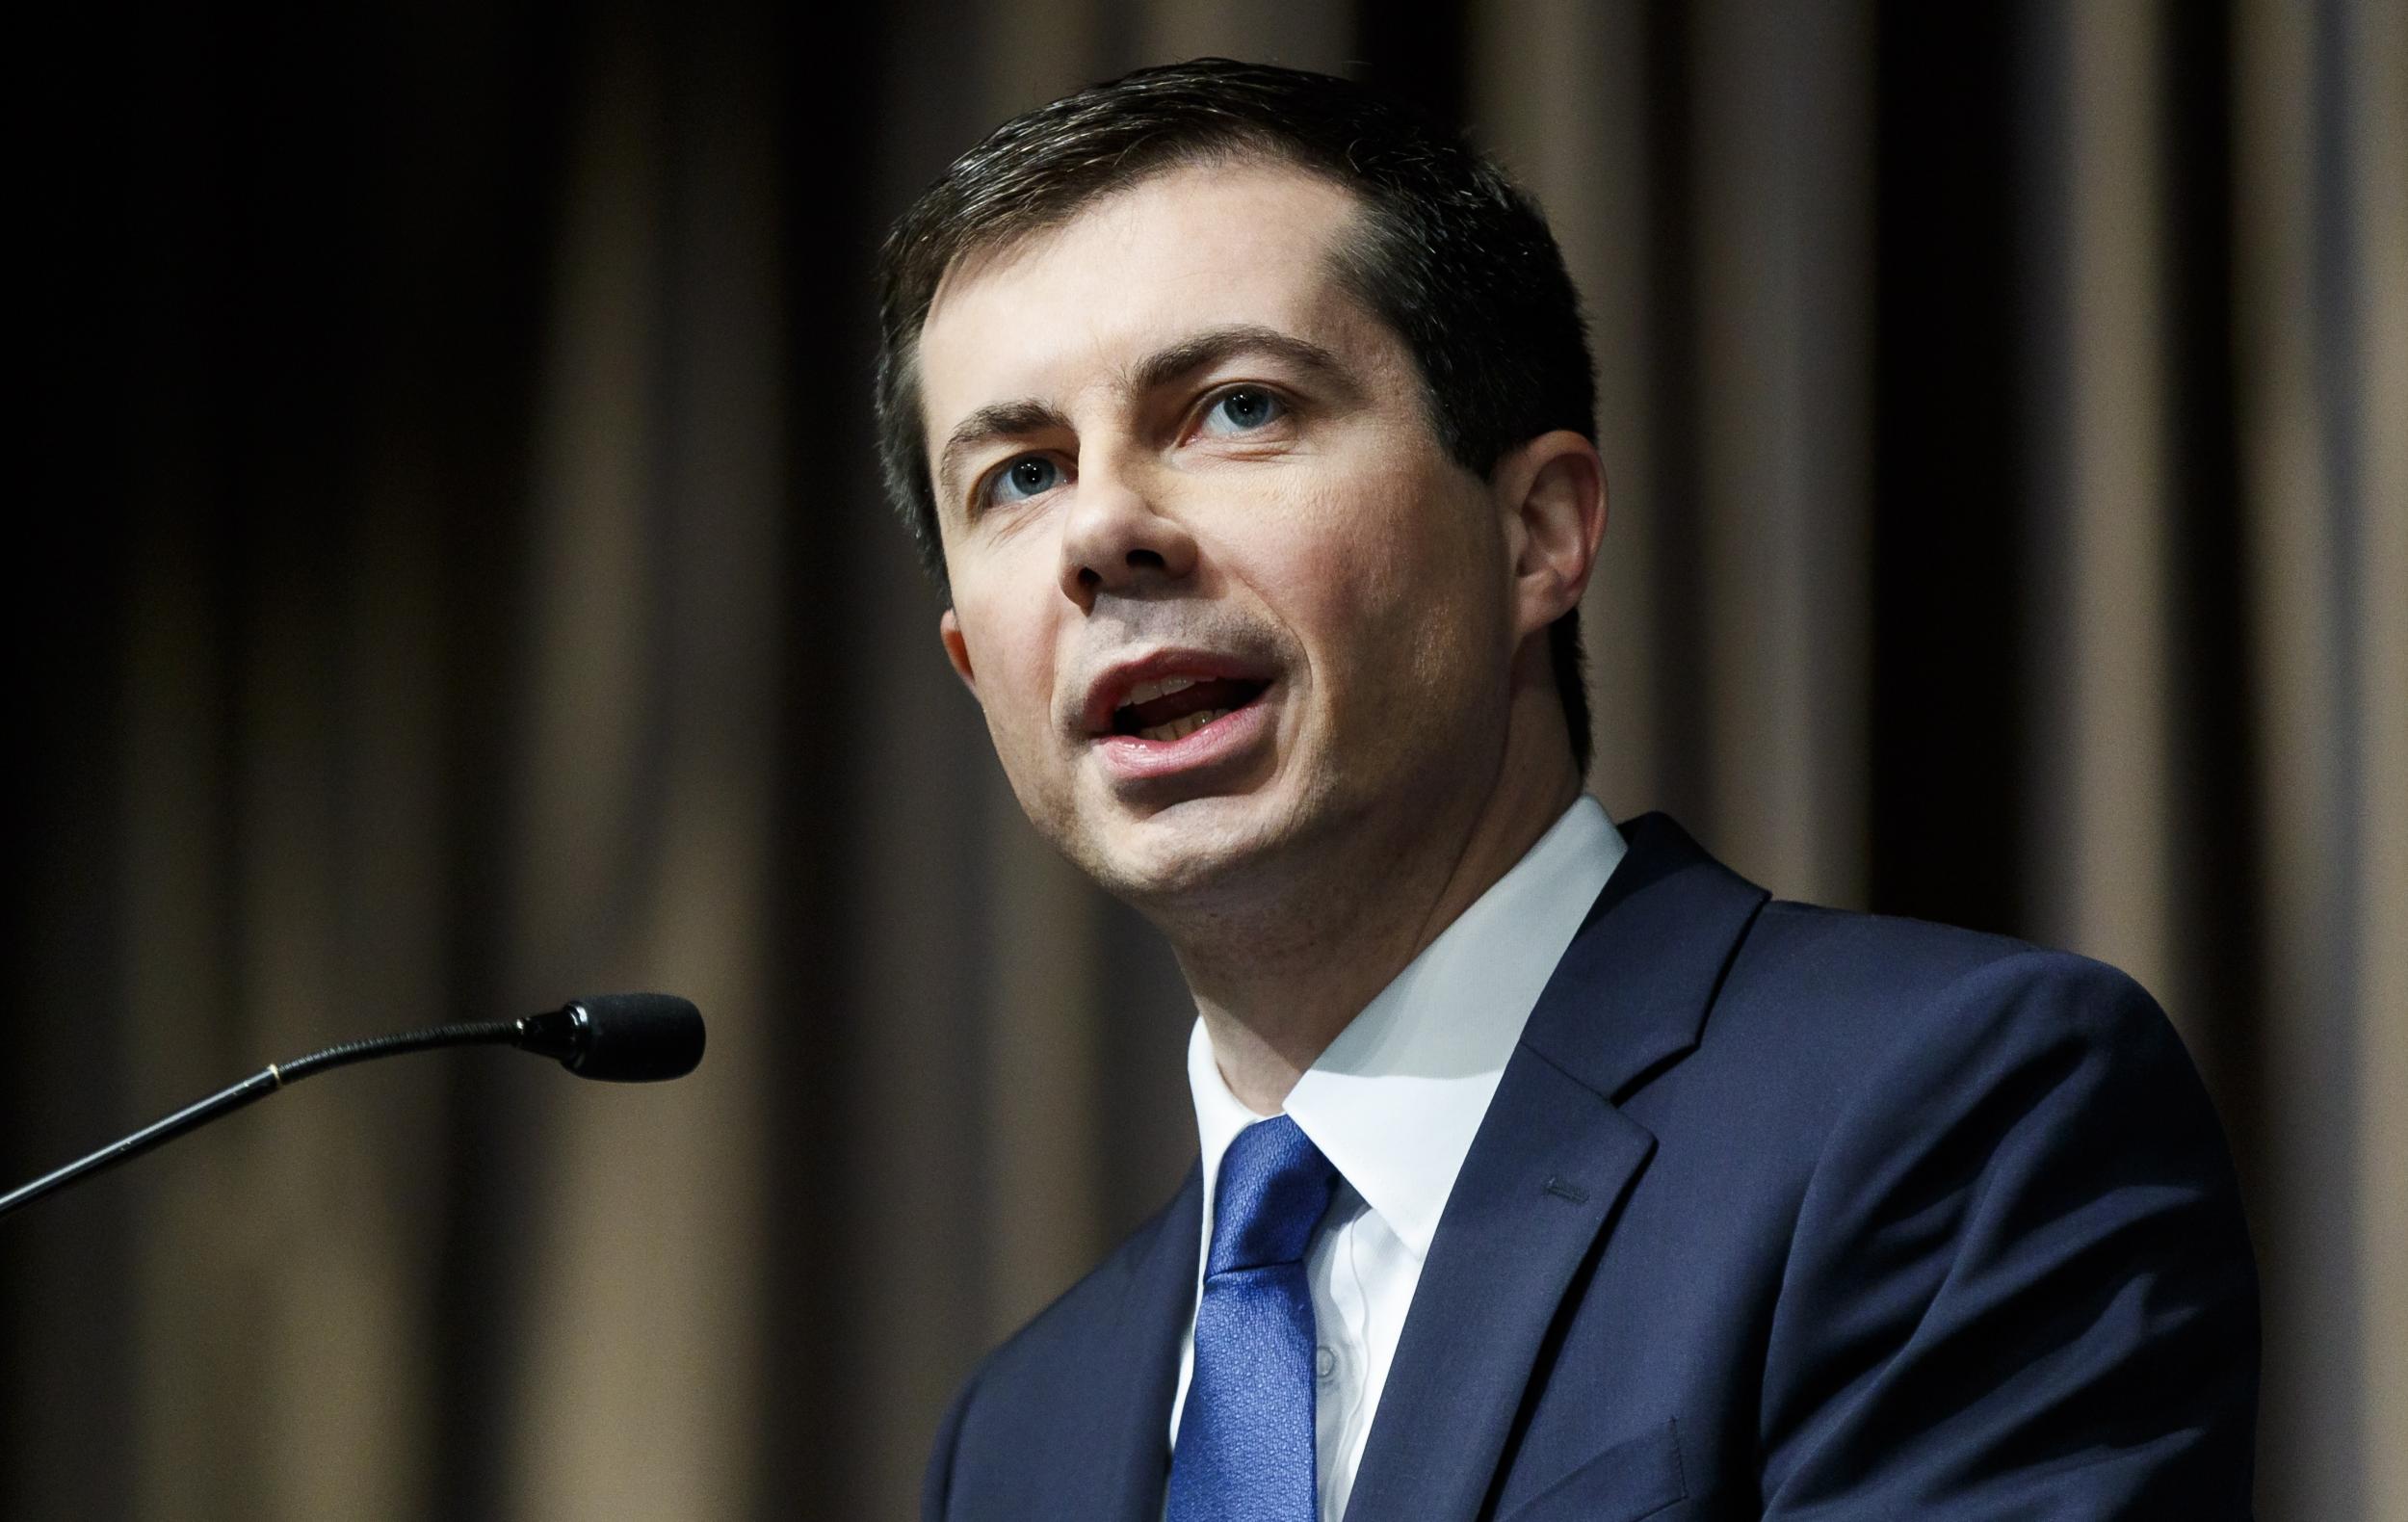 Pete Buttigieg falsely accused of sexual assault by 'right-wing trolls' fearing 'terminal threat' to Trump presidency